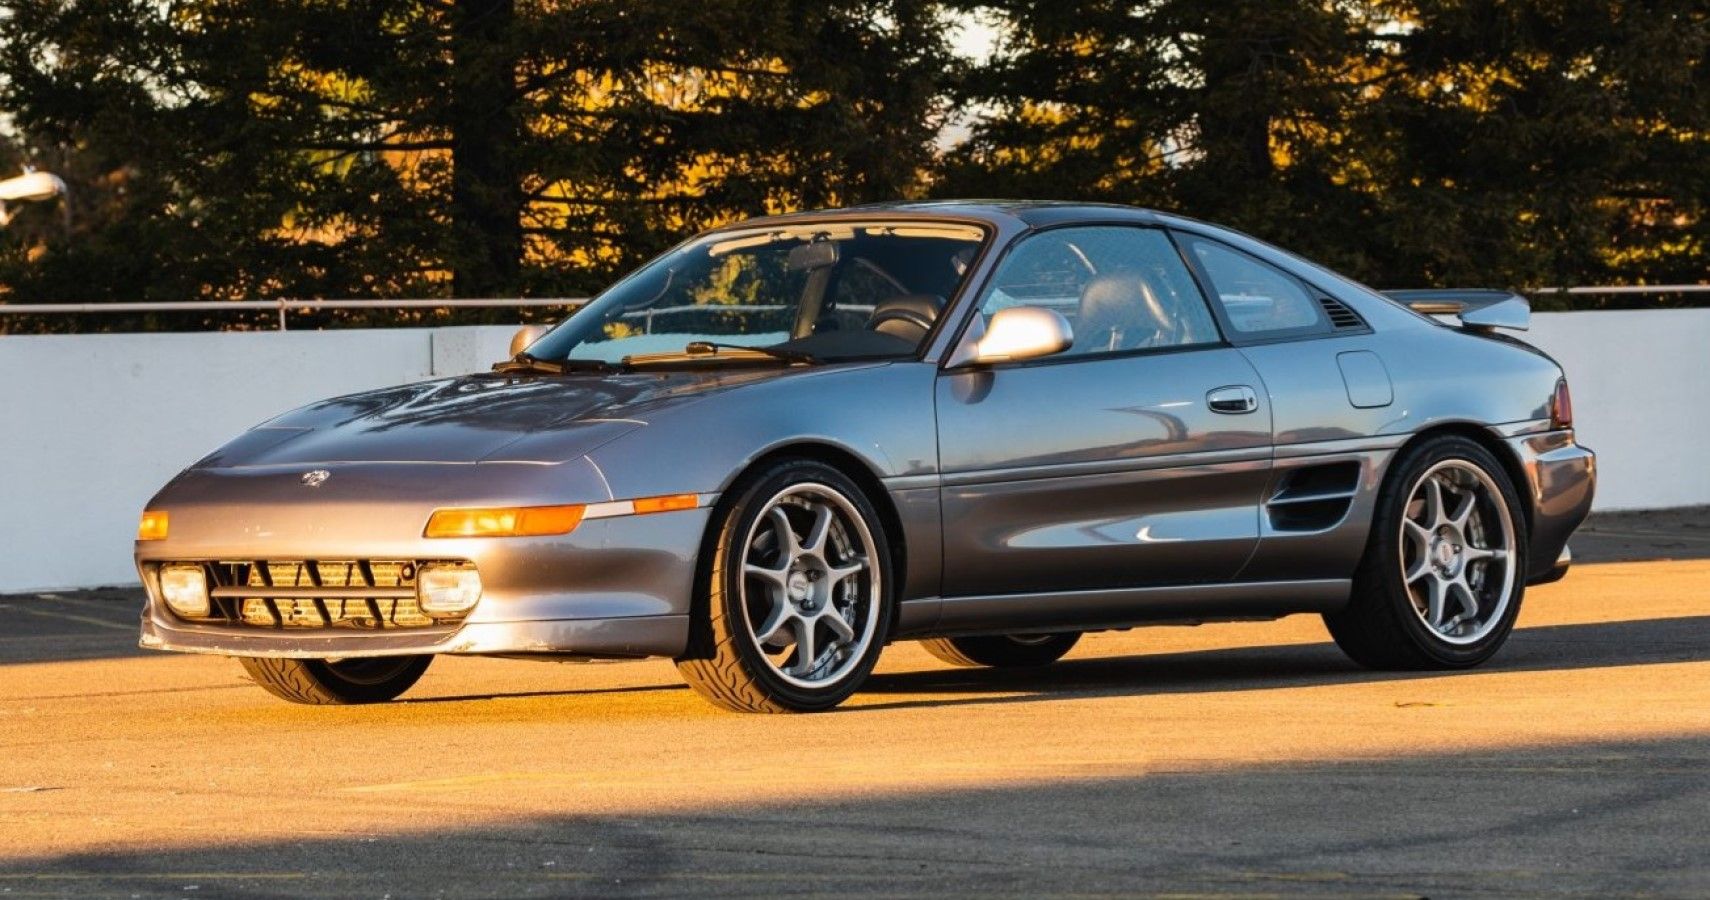 1994 second-gen Toyota MR2 on the driveway